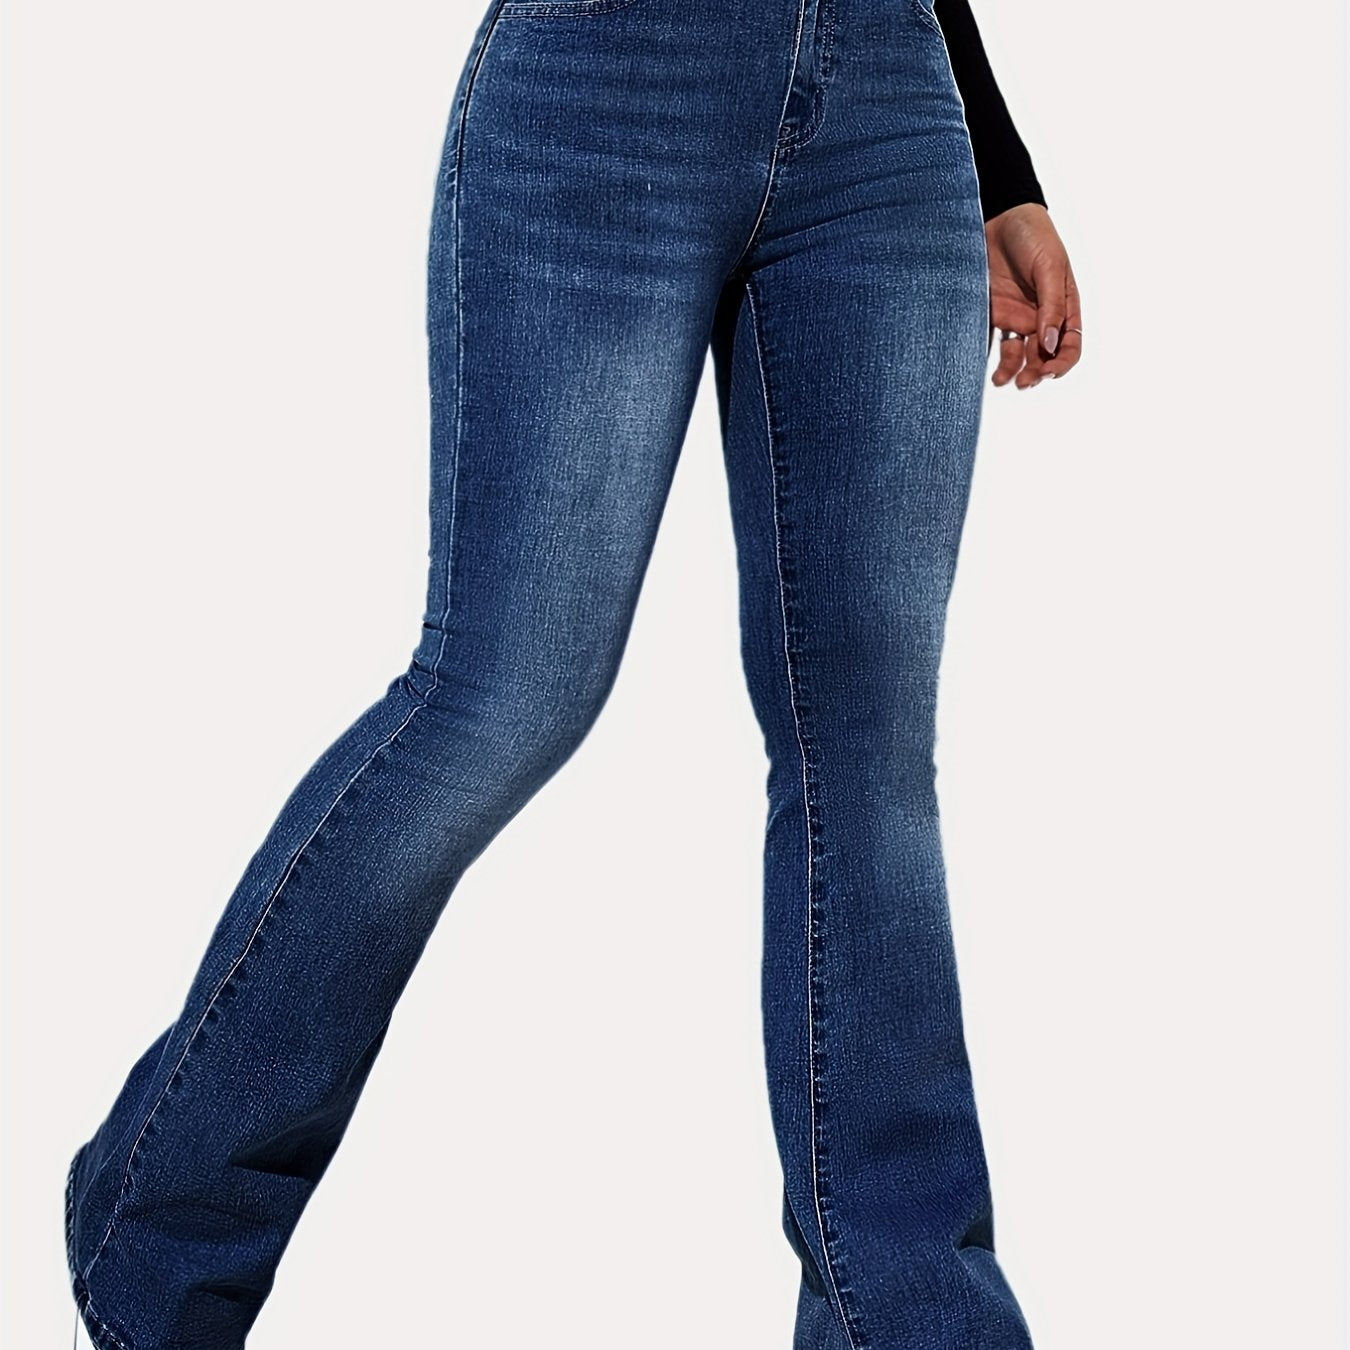 「lovevop」Curvy Stretchy Bootcut Flare Denim Jeans, High Waist Stretch Fitted Skinny Flare Jeans, Women's Denim Jeans & Clothing